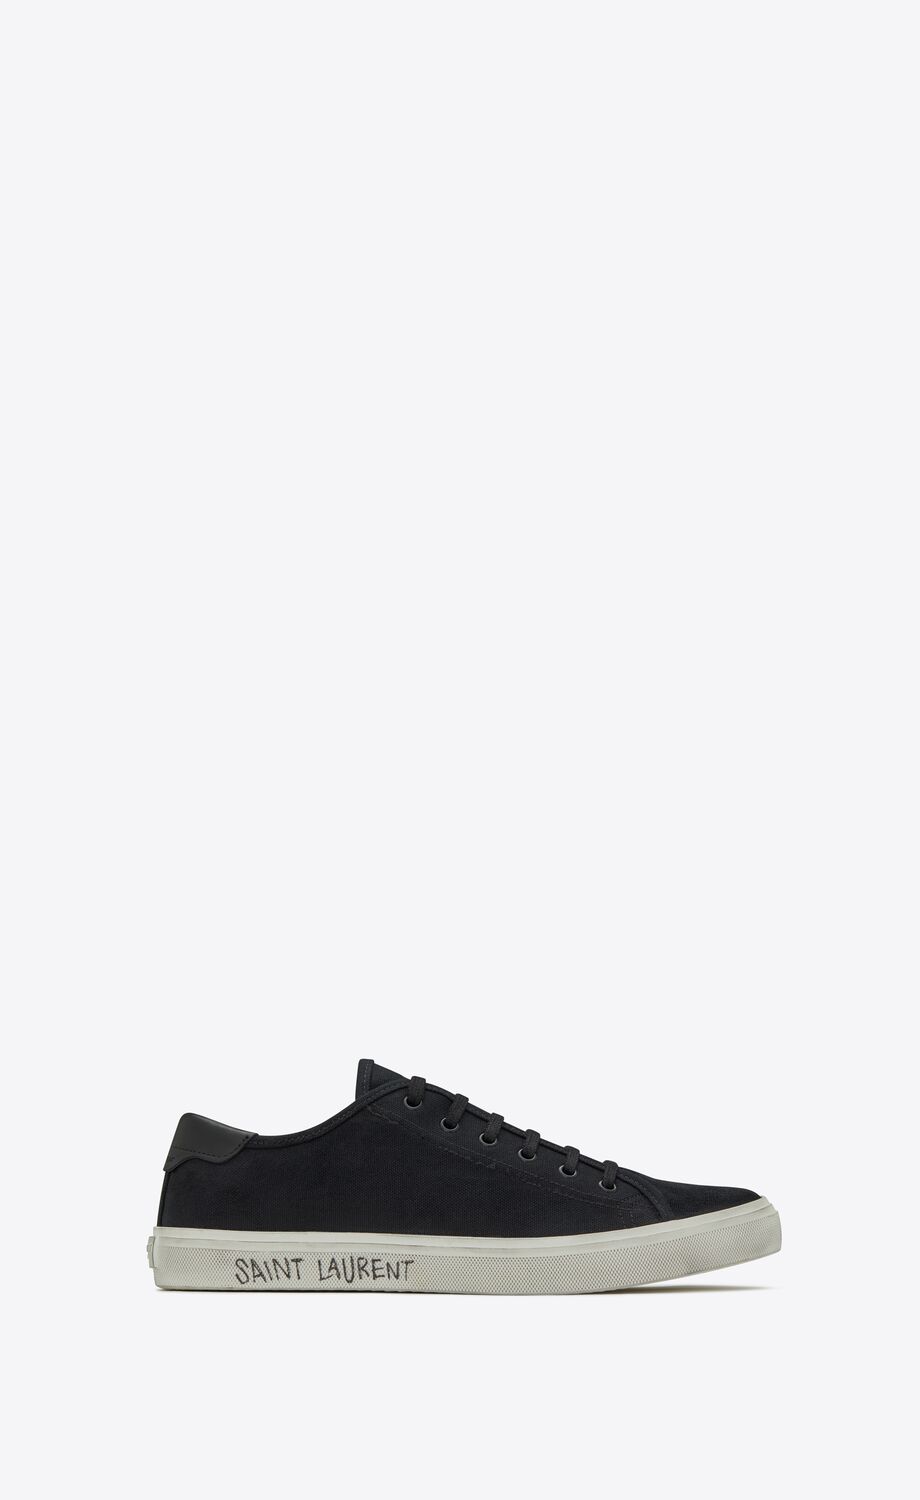 MALIBU sneakers in canvas and leather | Saint Laurent | YSL.com